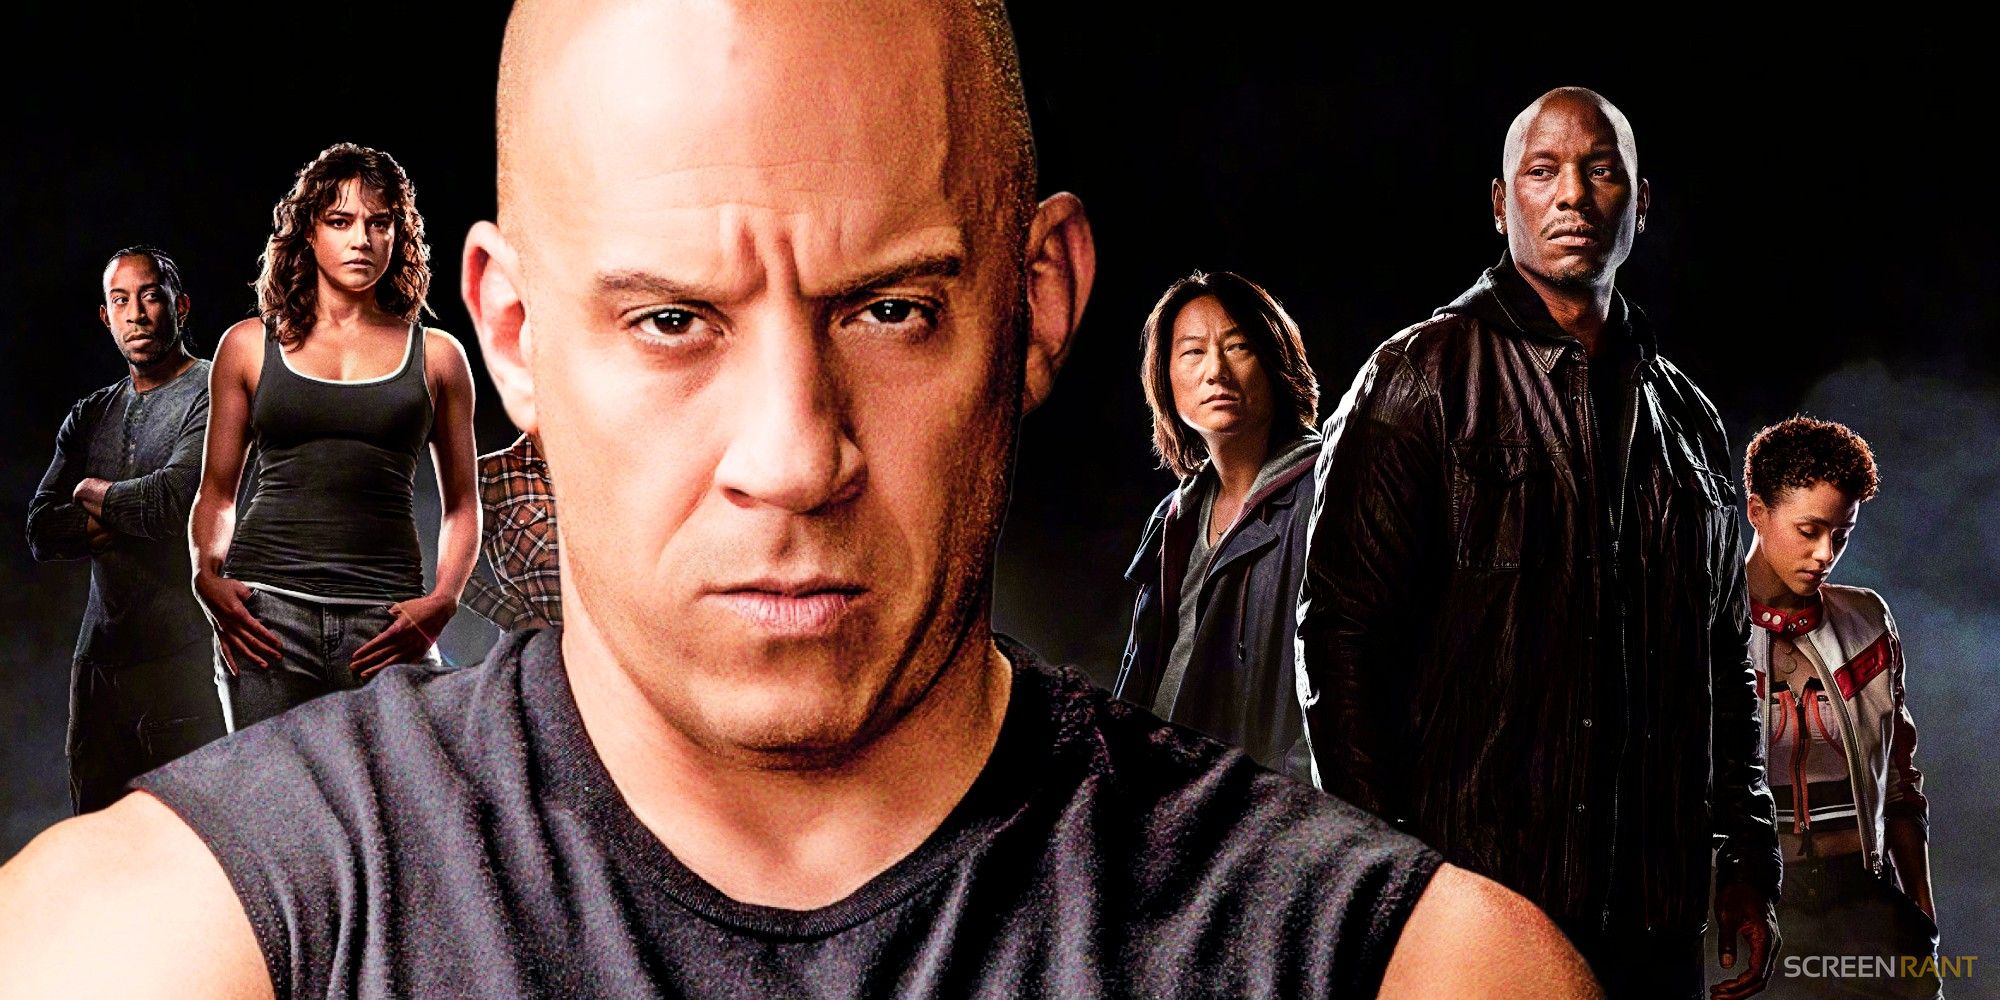 A blended image features Vin Diesel as Dom laid over other Fast & Furious franchise cast members